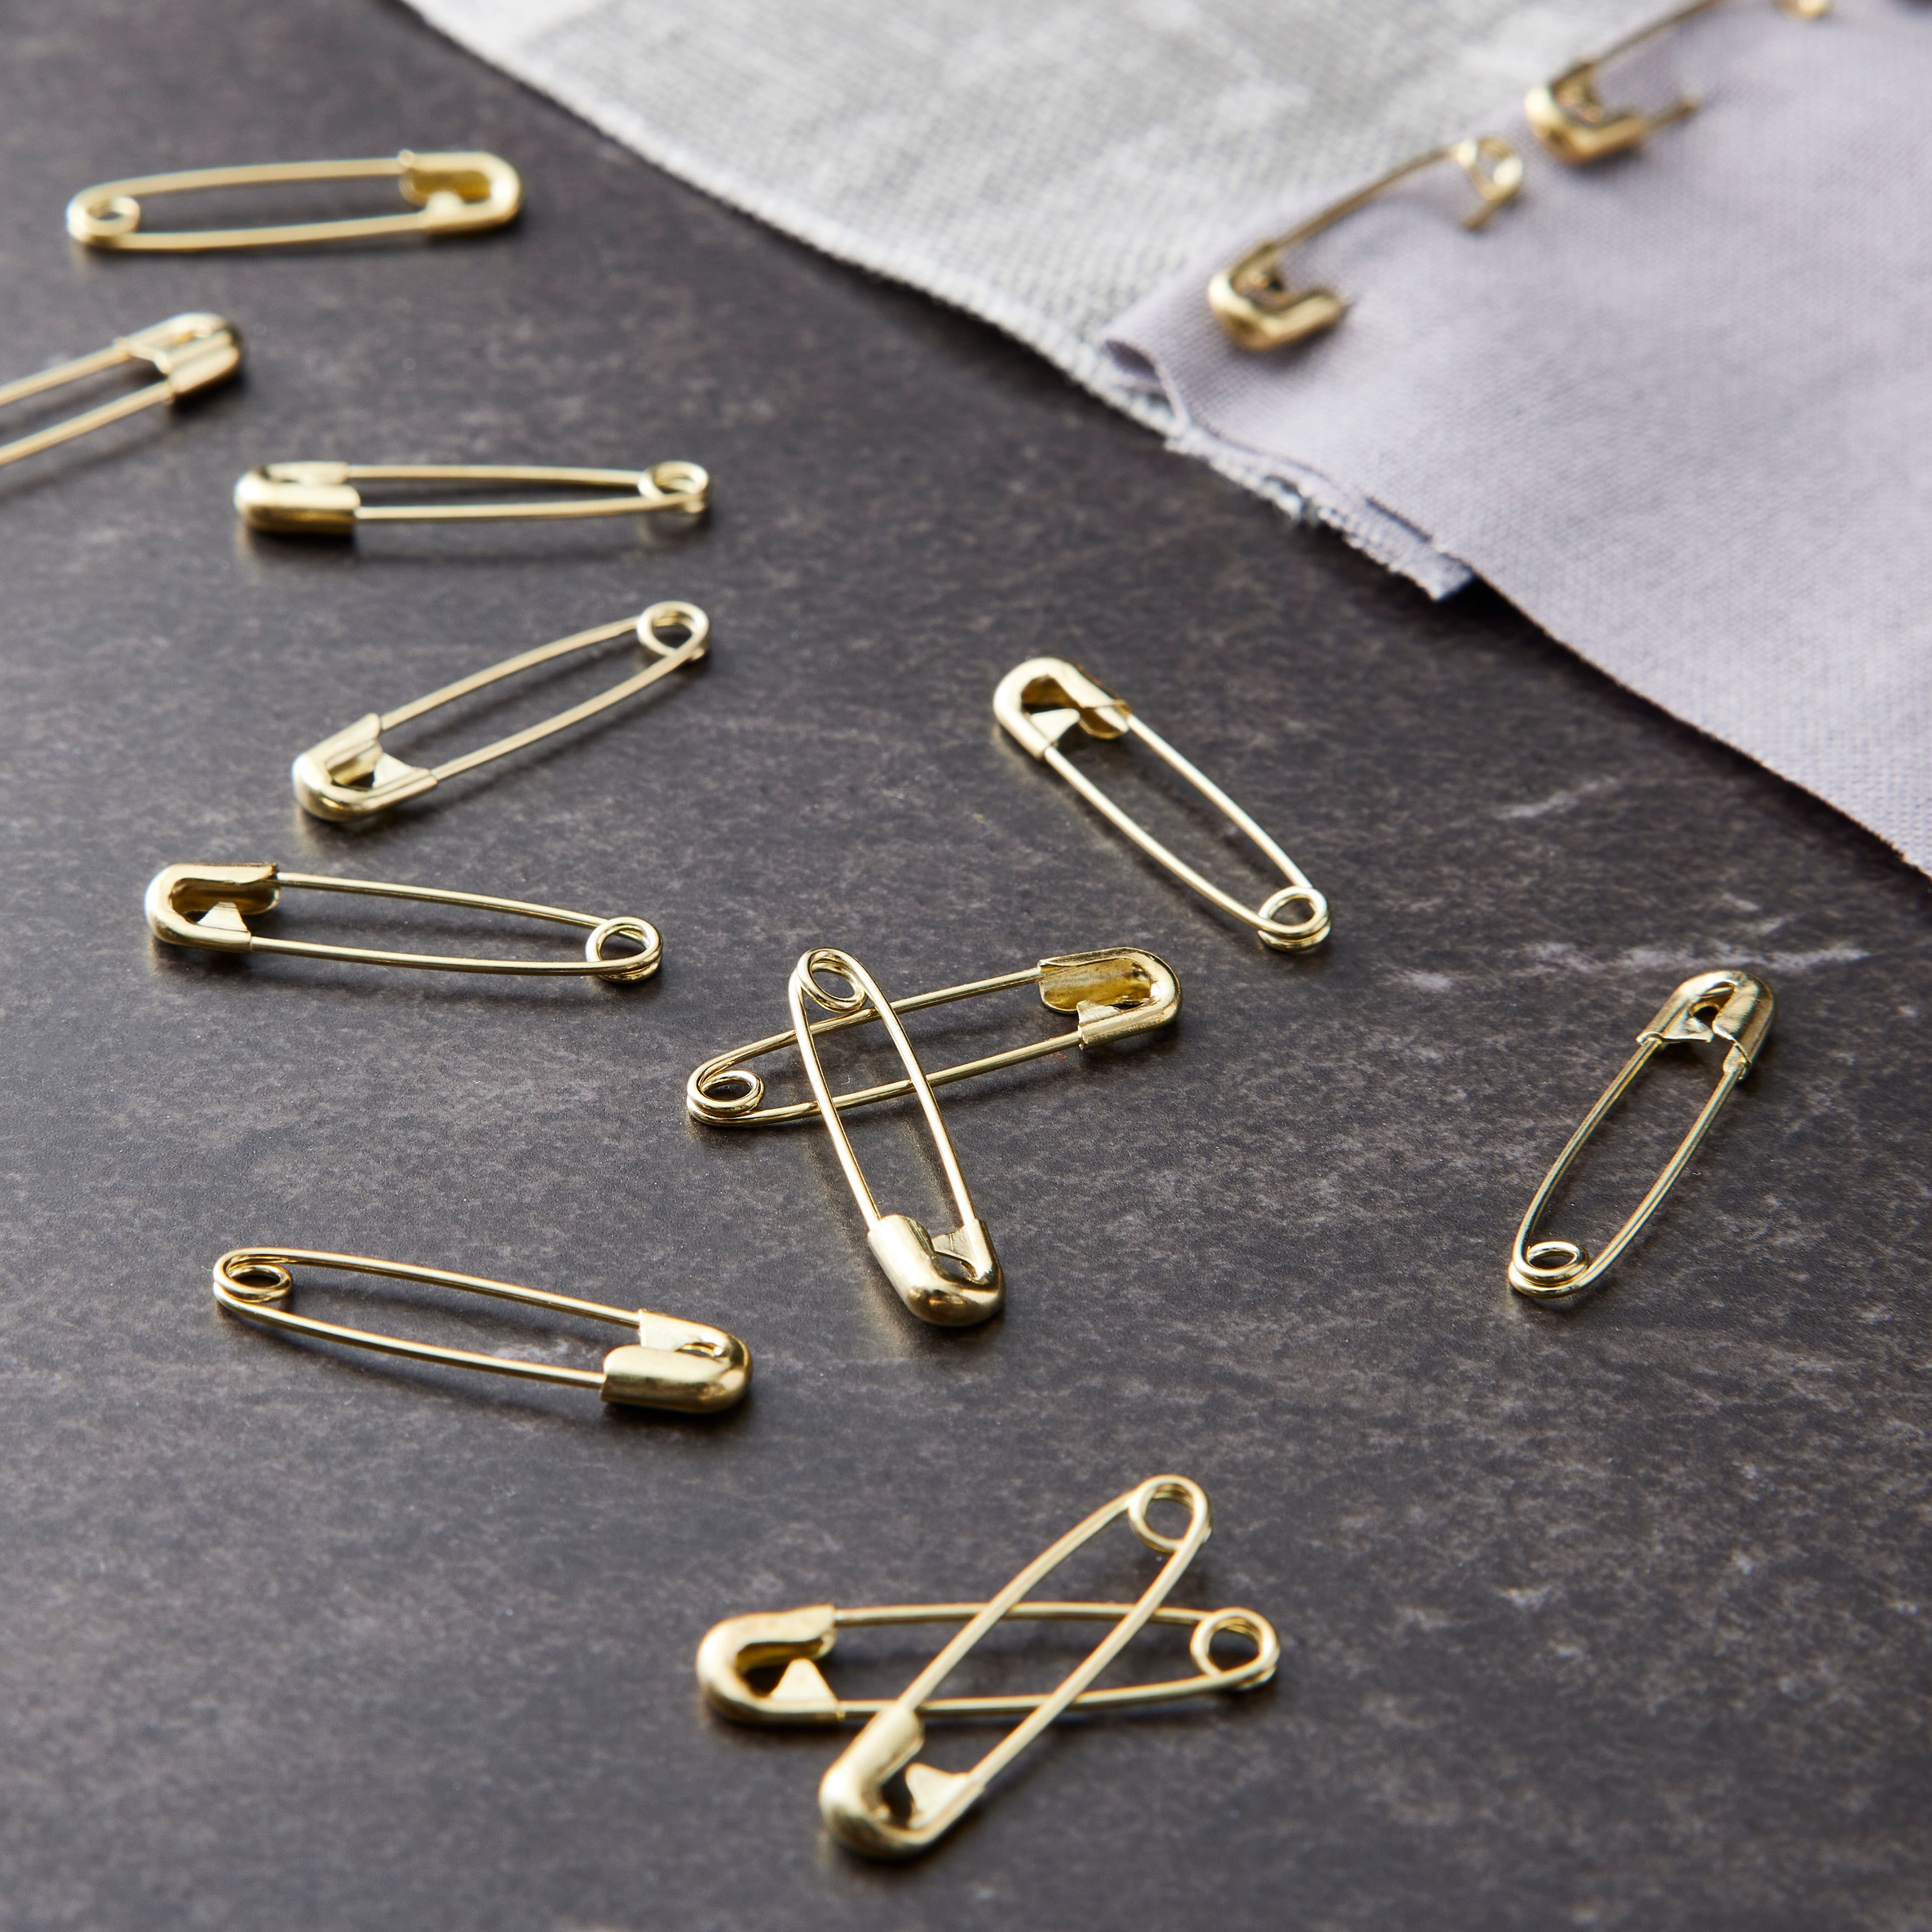 12 Packs: 50 ct. (600 total) Black Safety Pins by Loops & Threads™